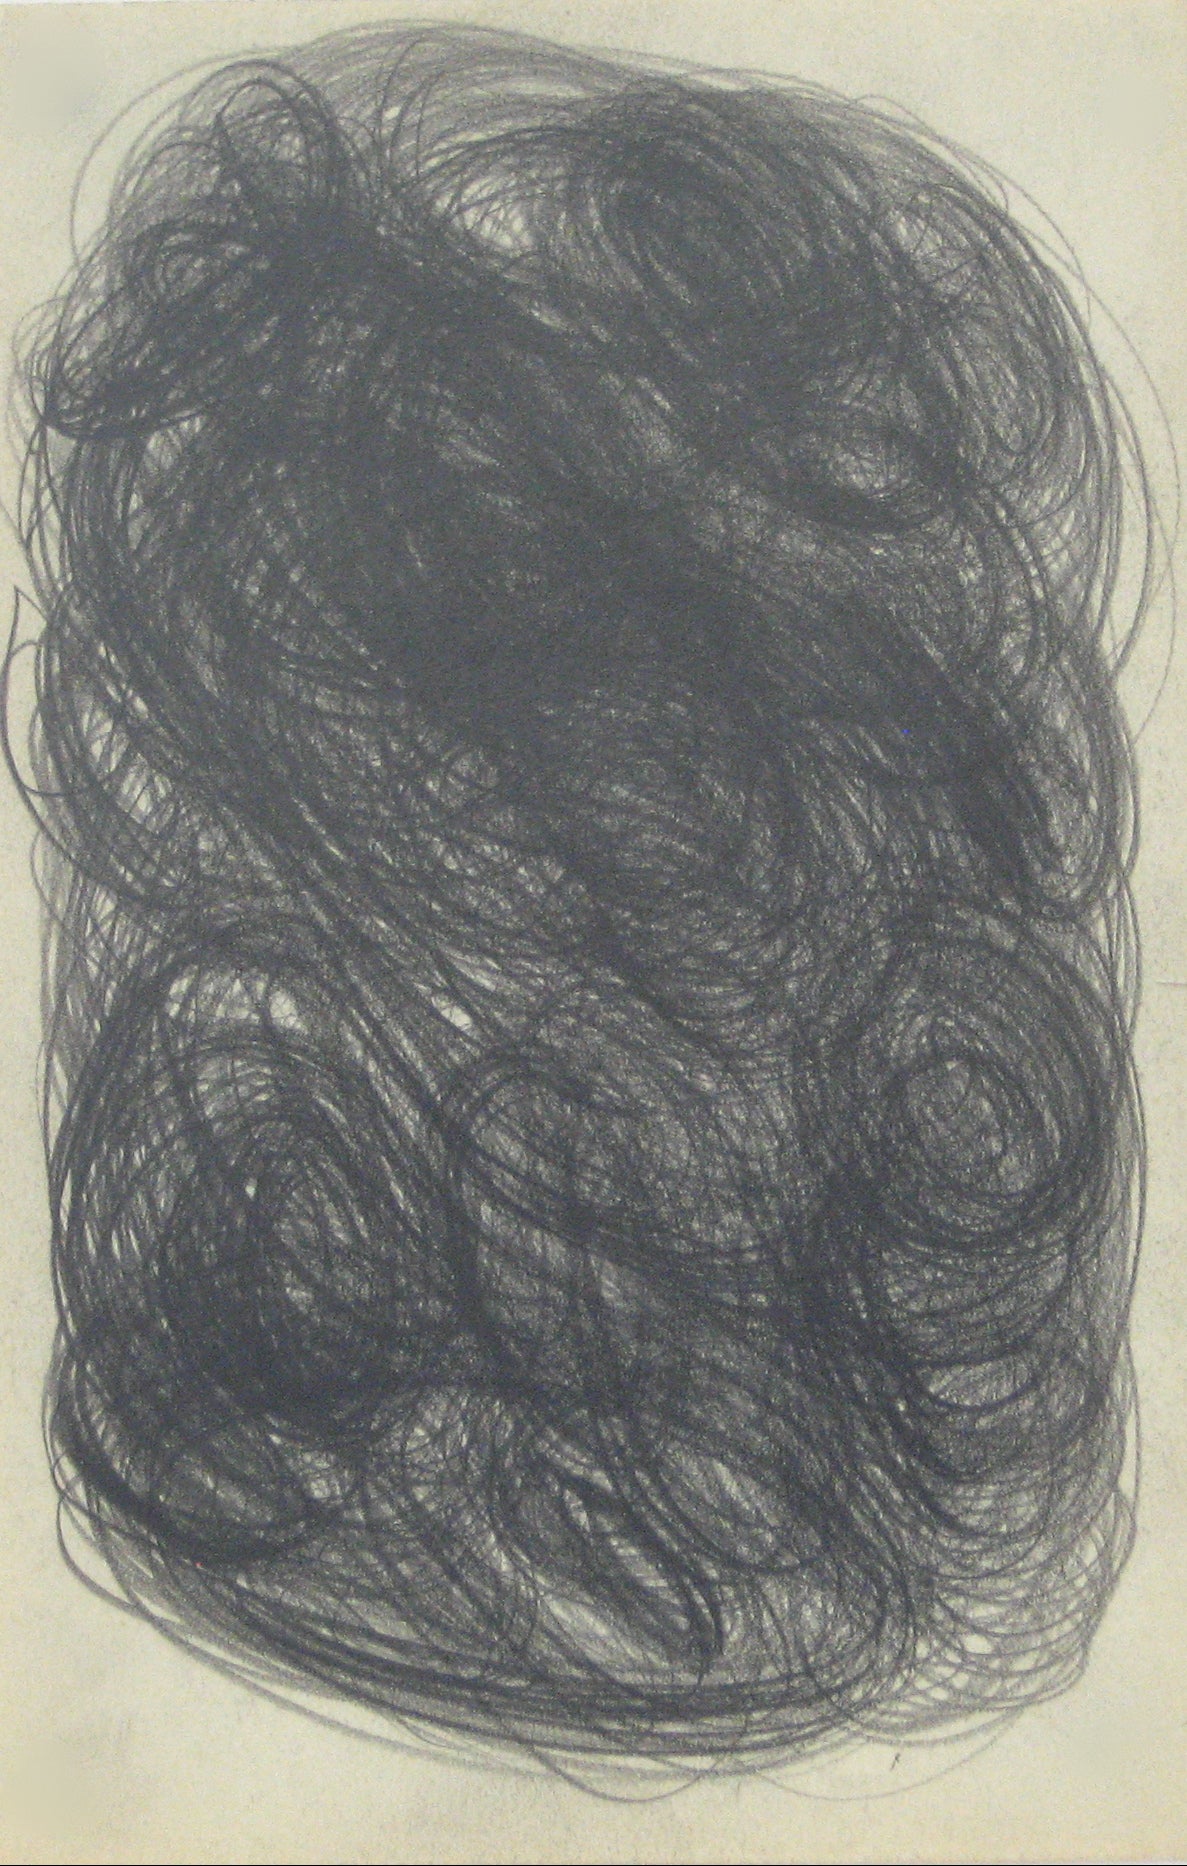 Swirled Graphite Abstract &lt;br&gt;Early-Mid 20th Century &lt;br&gt;&lt;br&gt;#14076